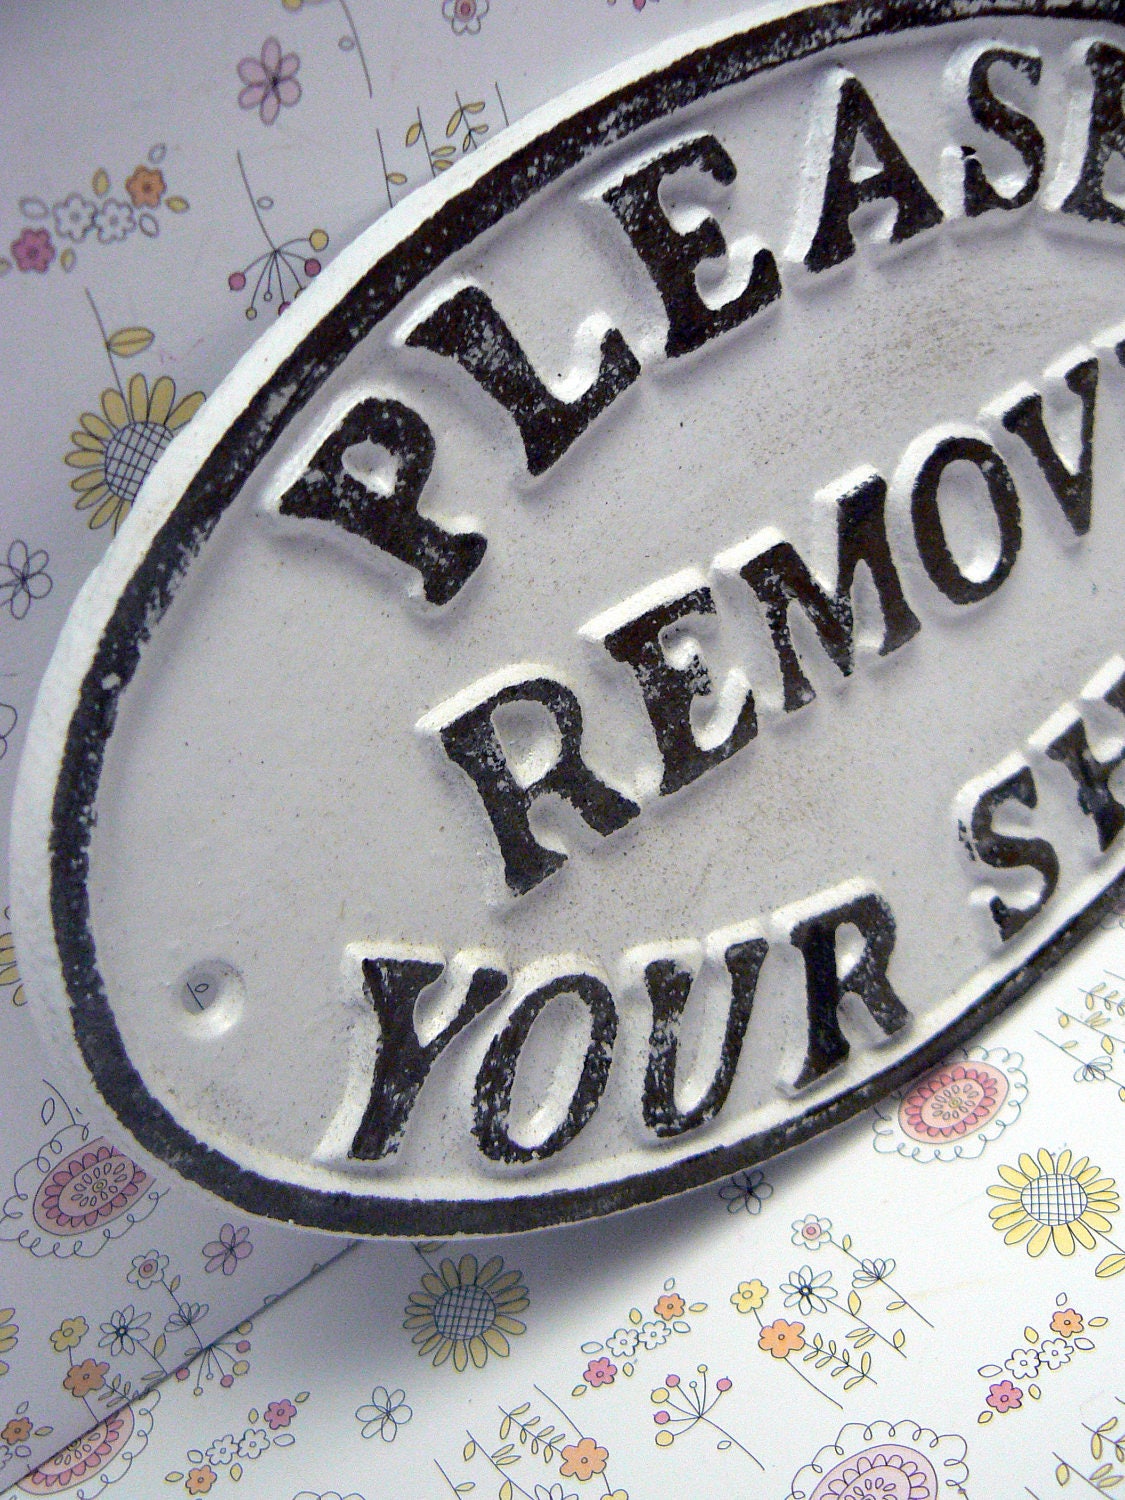 "Please Remove Your Shoes" Sign Oval Plaque cast iron metal Brown patina finish 